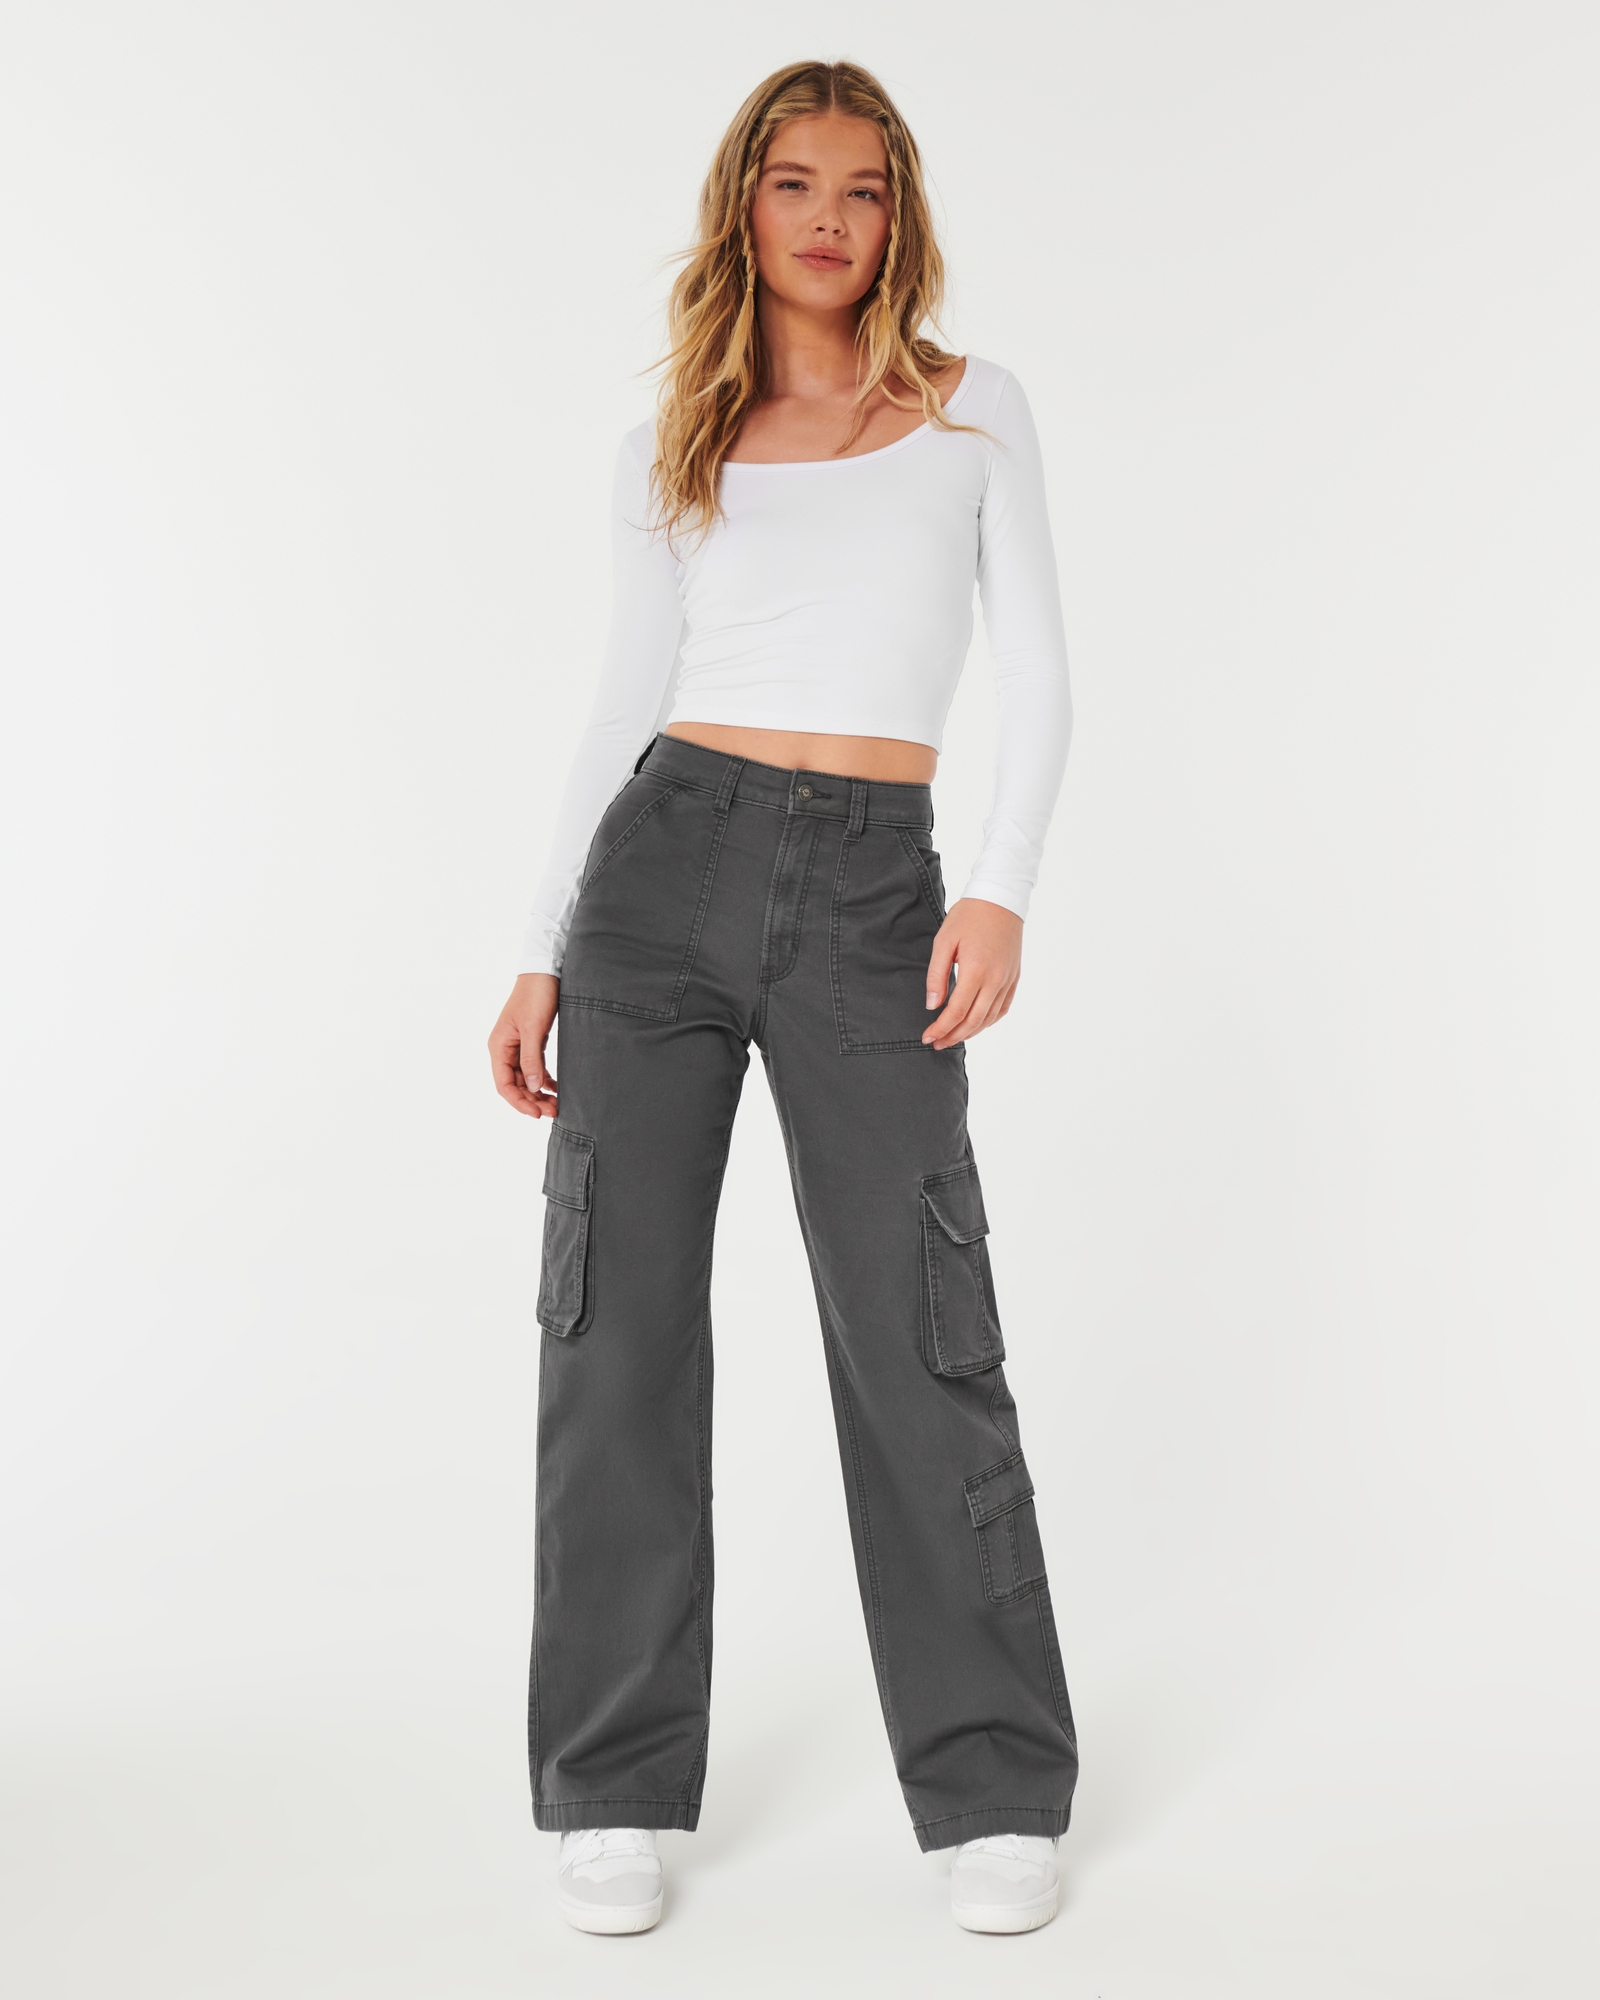 Women's Cargo Pants With High Waist  Pants for women, Cargo pants women, Women  cargos